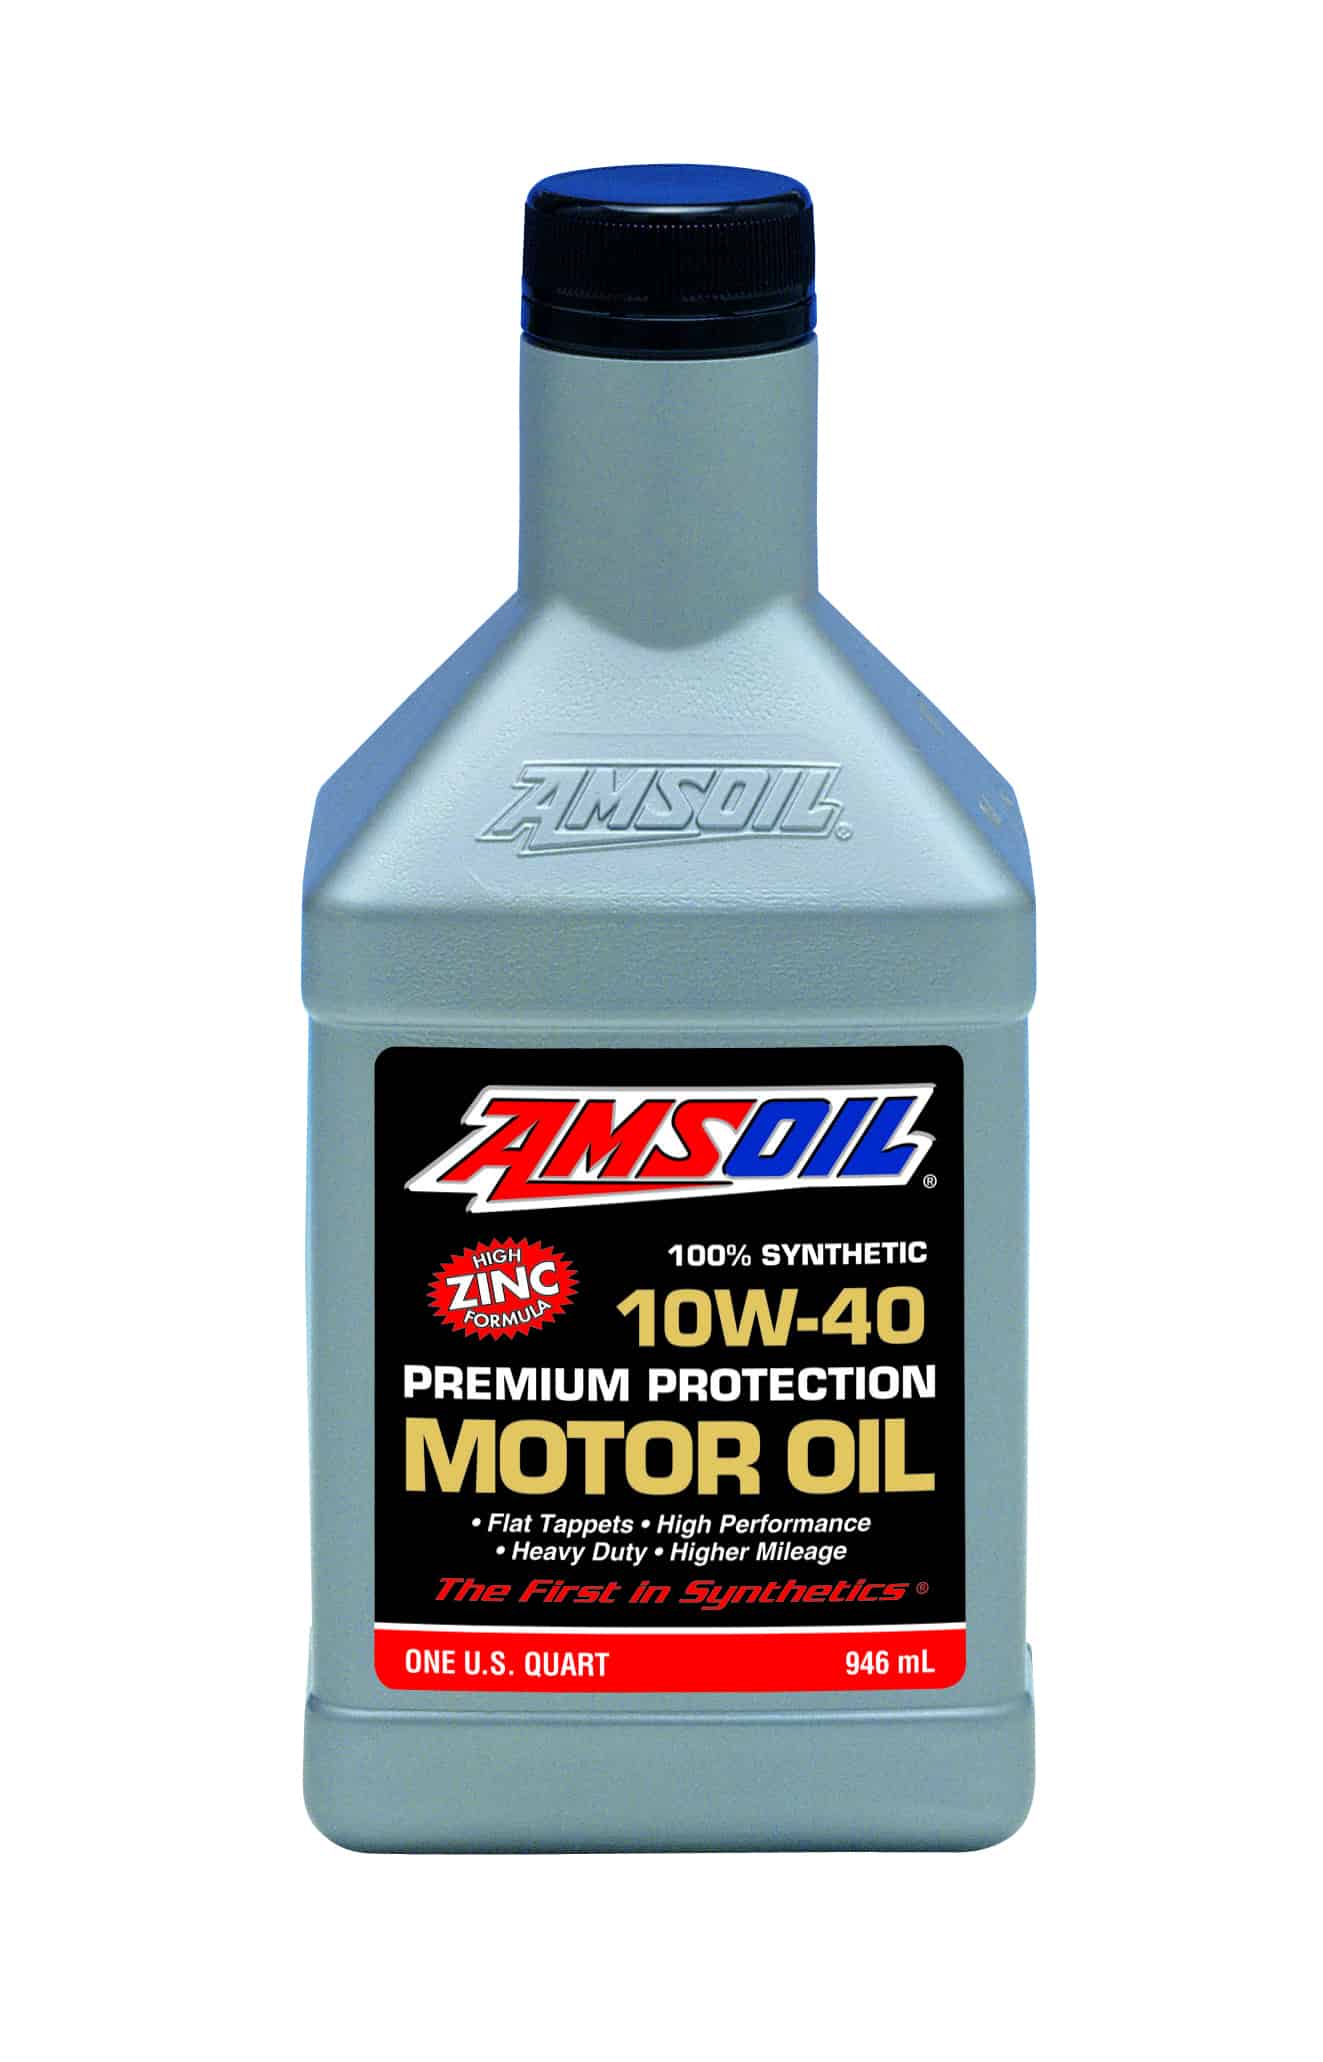 A bottle of AMSOIL Premium Protection Synthetic Motor Oil, designed to provide great protection. It offers flexibility & performance beyond conventional oils.